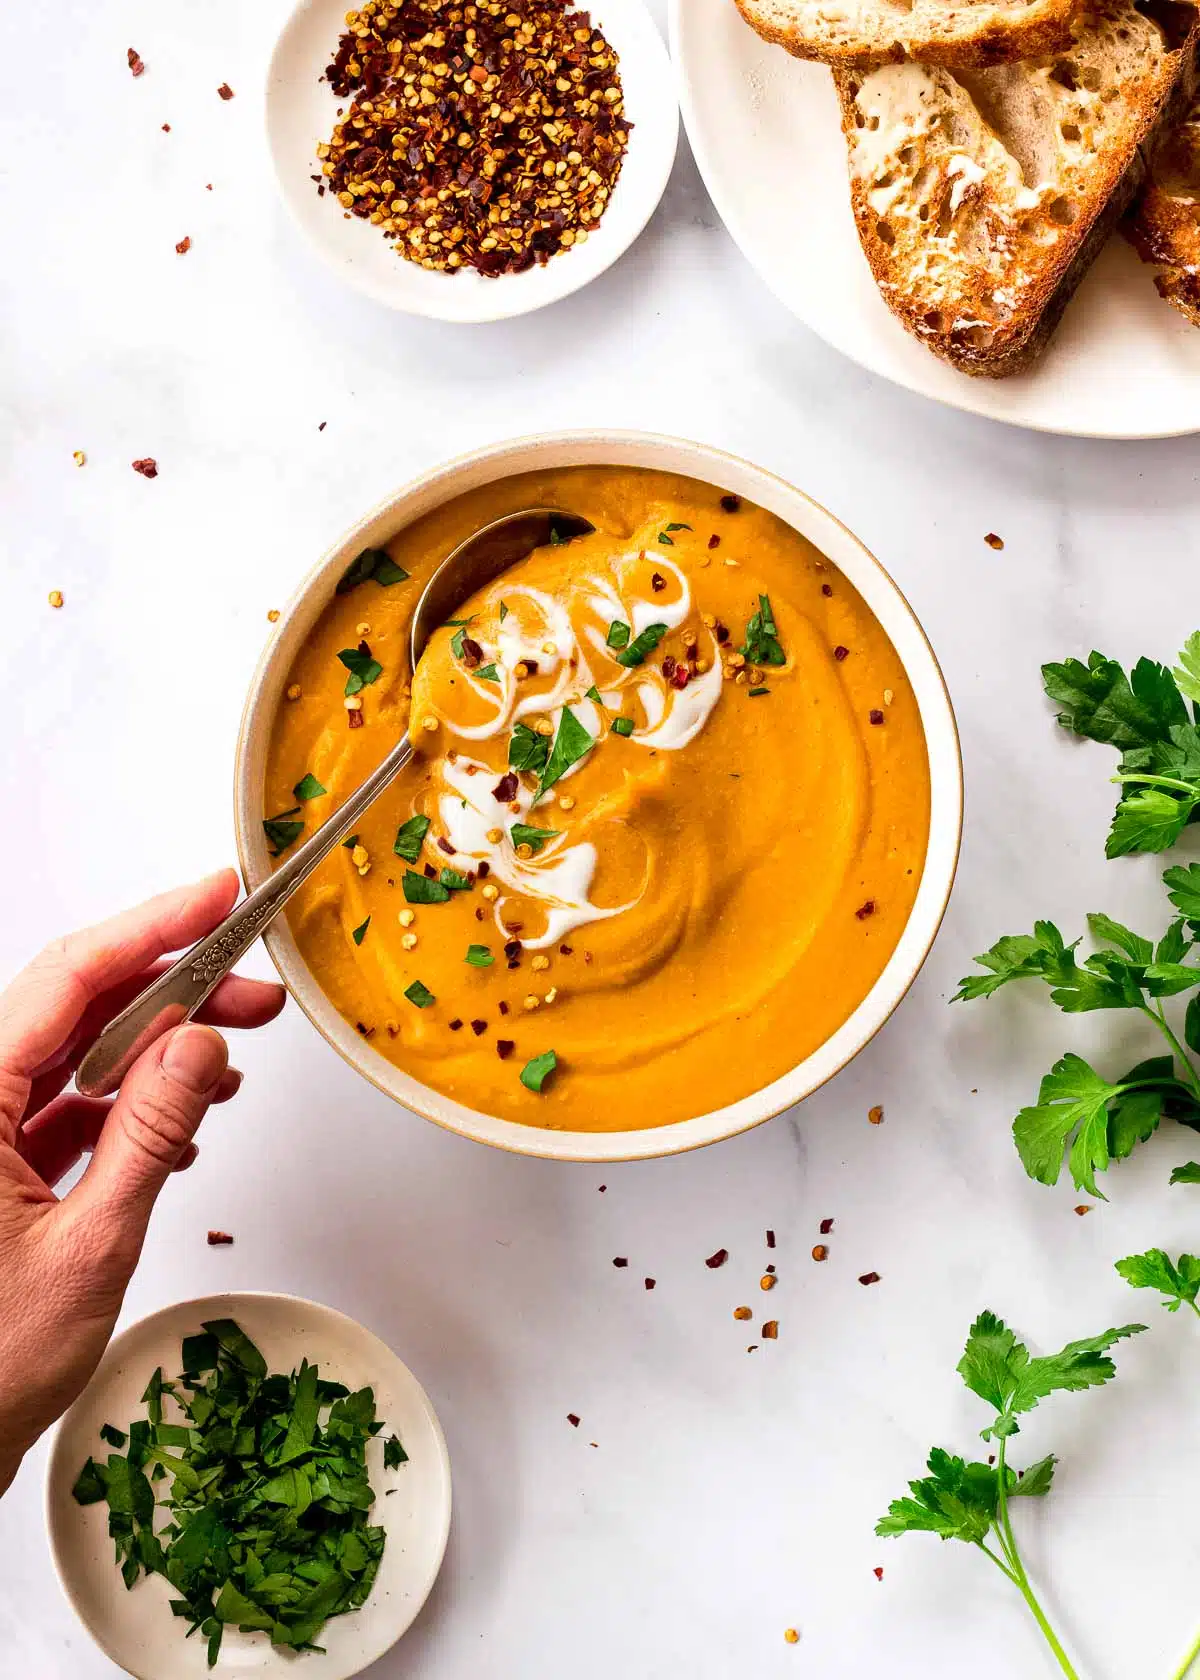 A woman's hand reaches for a spoon in a bowl of Lentil and Carrot Soup decorated with yoghurt and parsley.